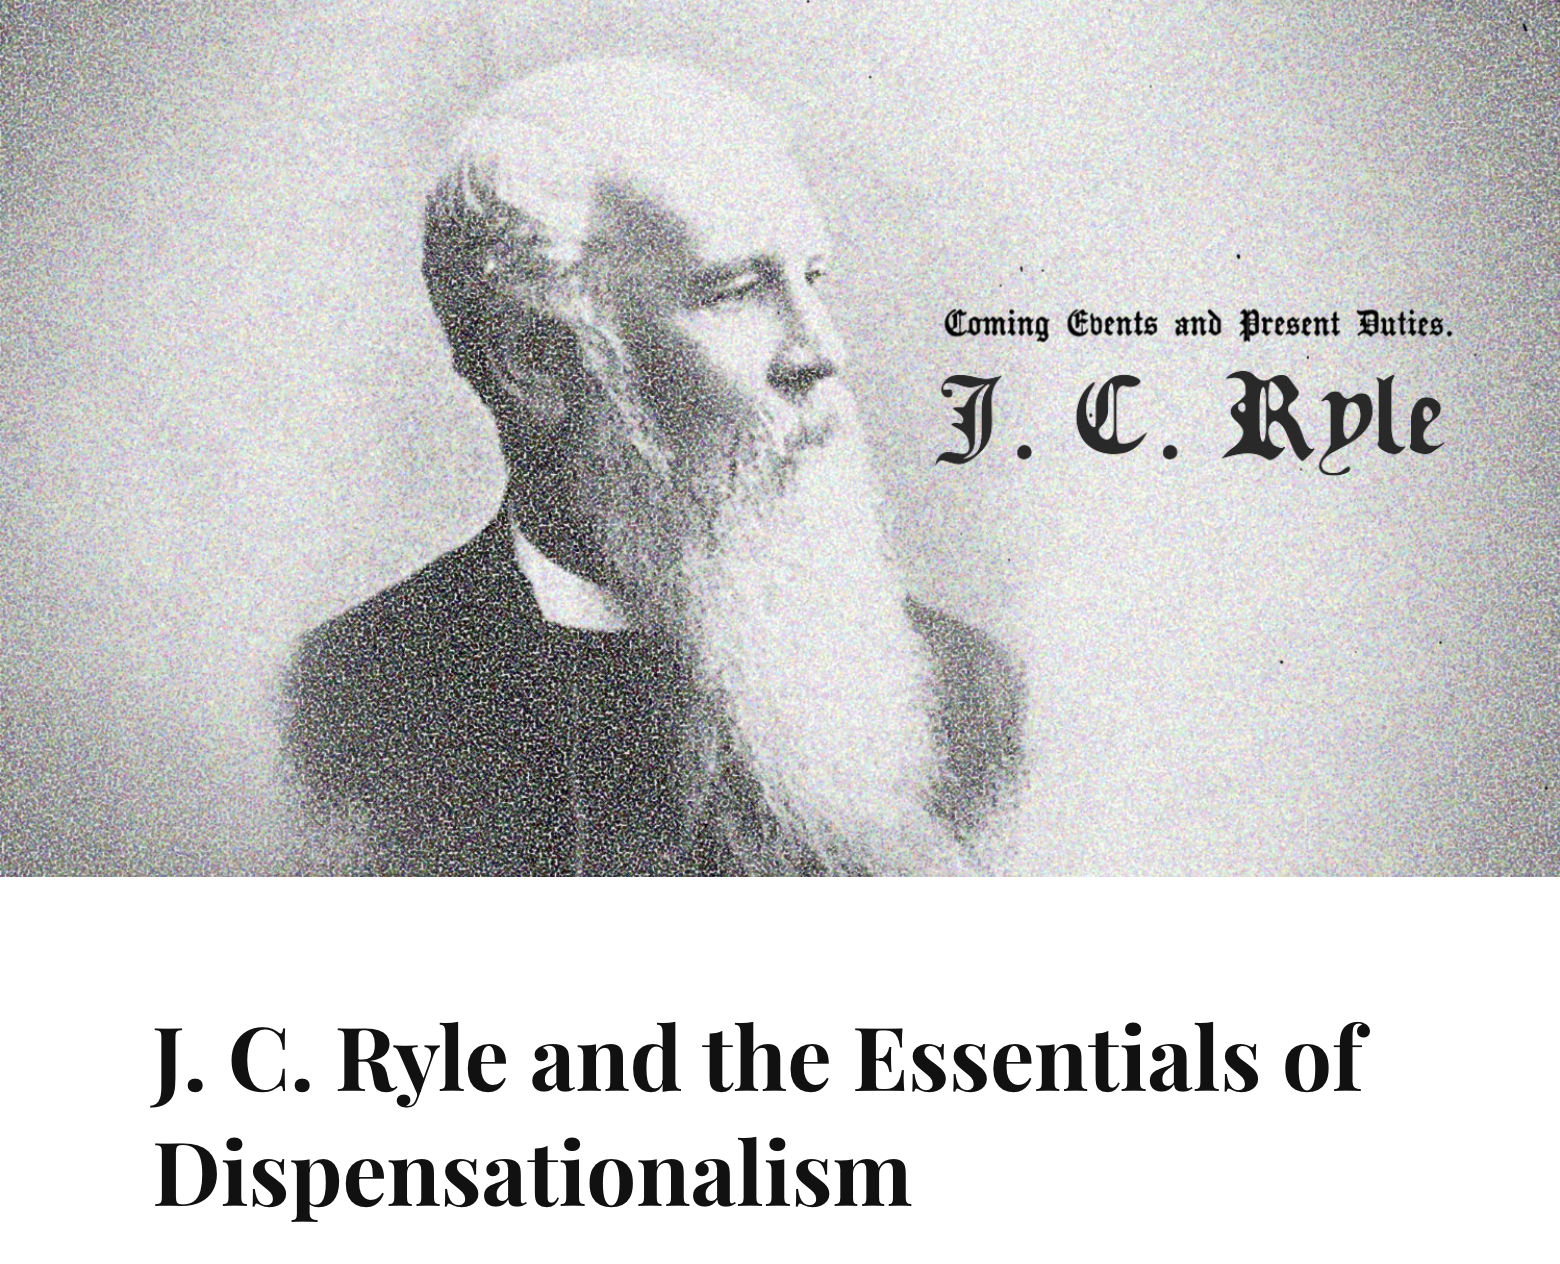 Ryle article